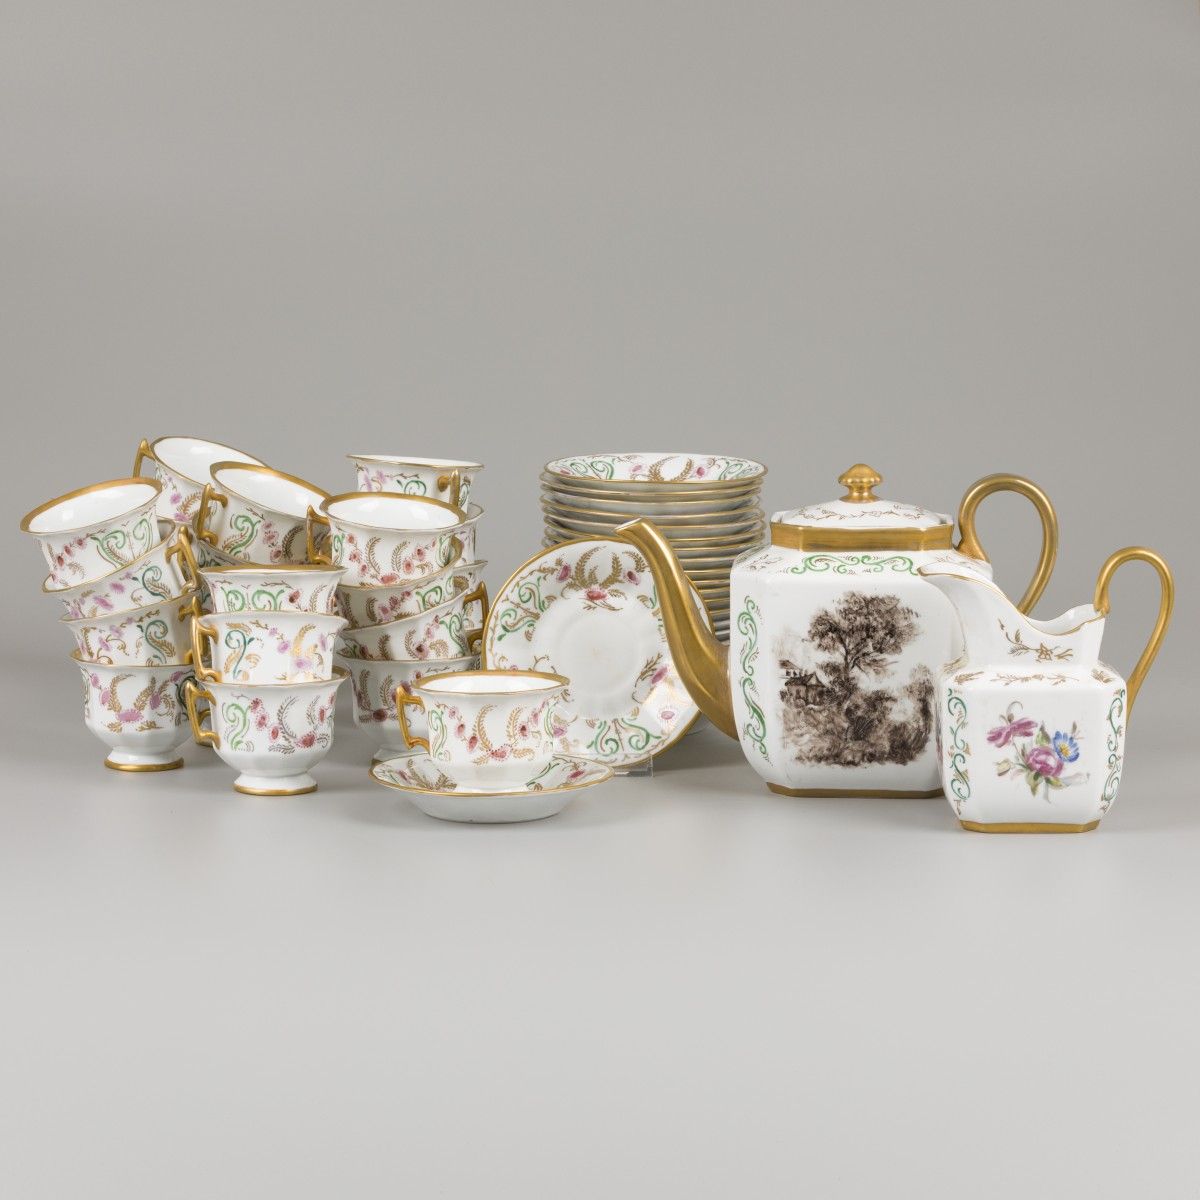 A (26) piece porcelain service with floral decor. France, 19th century. 估计：50 - &hellip;